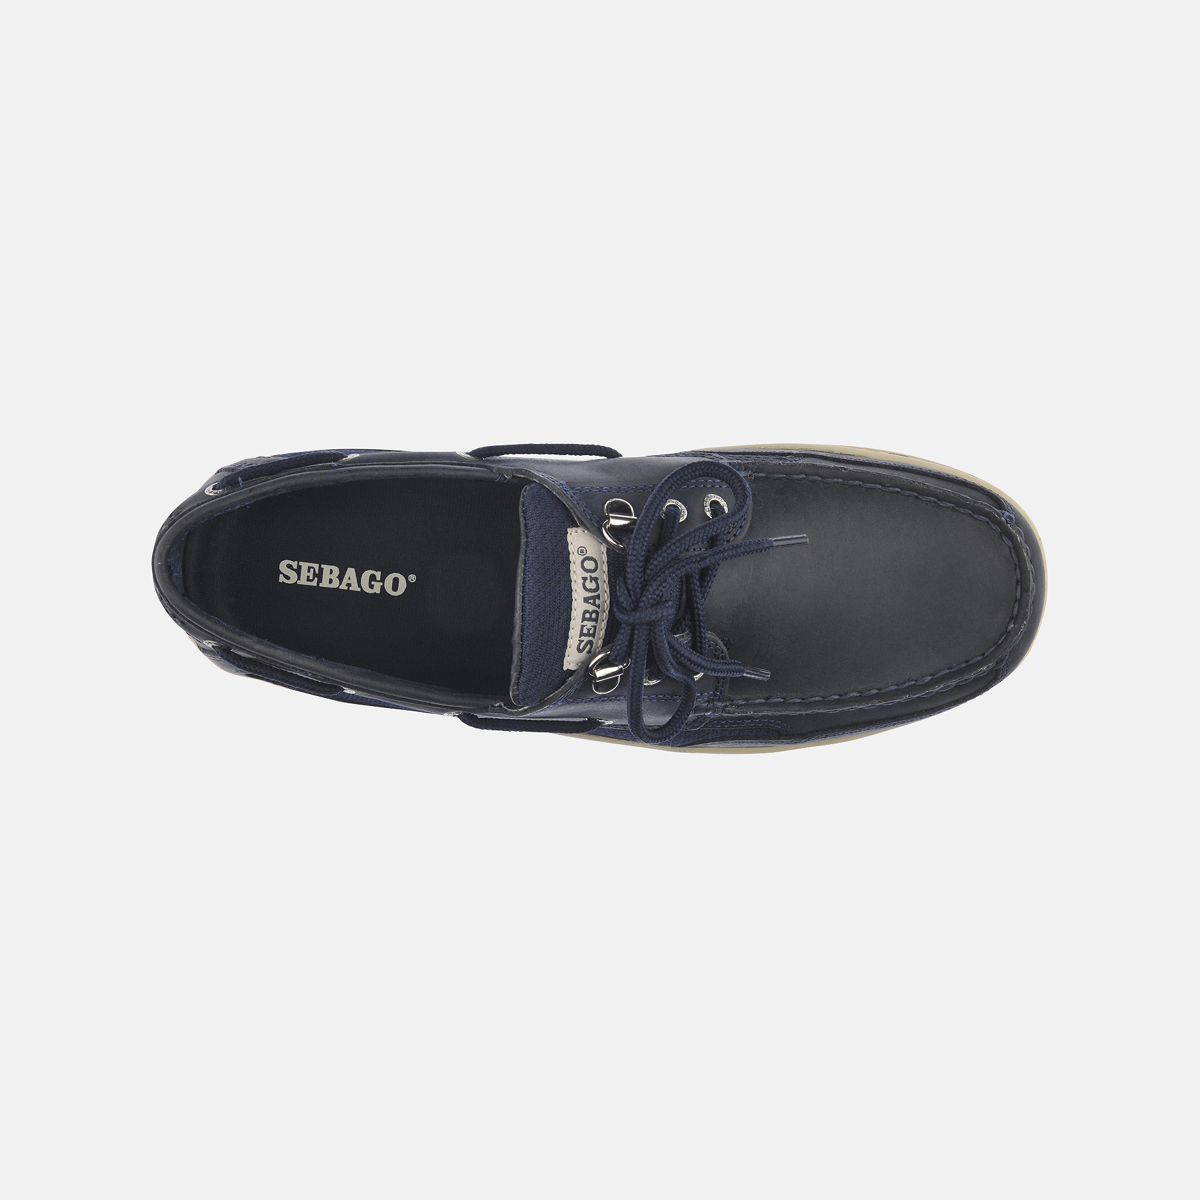 Sebago Clovehitch II chaussures bateau homme blue navy leather, taille 43 (US 9)